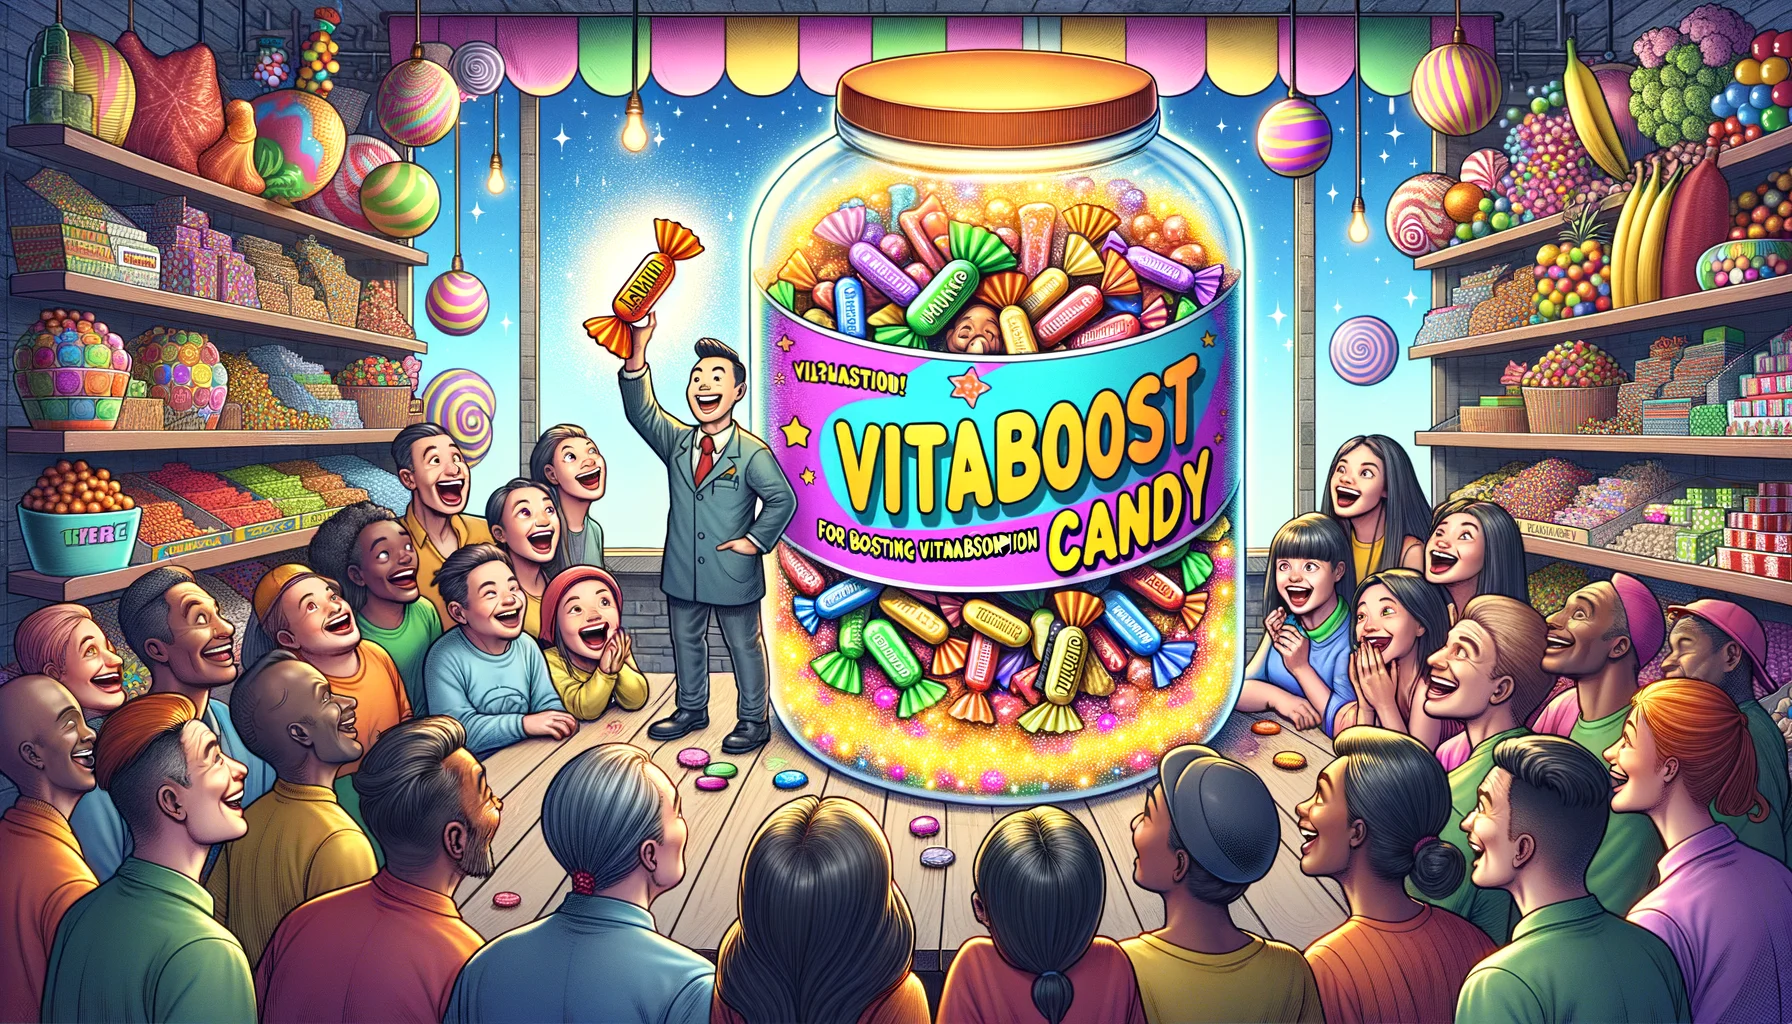 An imaginative yet comical depiction representing 'Candy for Boosting Vitamin Absorption'. Let's visualize a brightly colored candy shop with goodies of all shapes and sizes. In the centre of the shop, a gigantic jar labelled 'Vitaboost Candy' sparkles. There's a cartoon of a happy Southeast Asian male shopkeeper offering a candy from the jar to a joyful, Hispanic female customer. The candy itself illuminates with all the colors of a rainbow, symbolizing different vitamins. Spectating this scene could be a diverse group of people curiously peering at the jar, their faces a mix of amusement and intrigue.